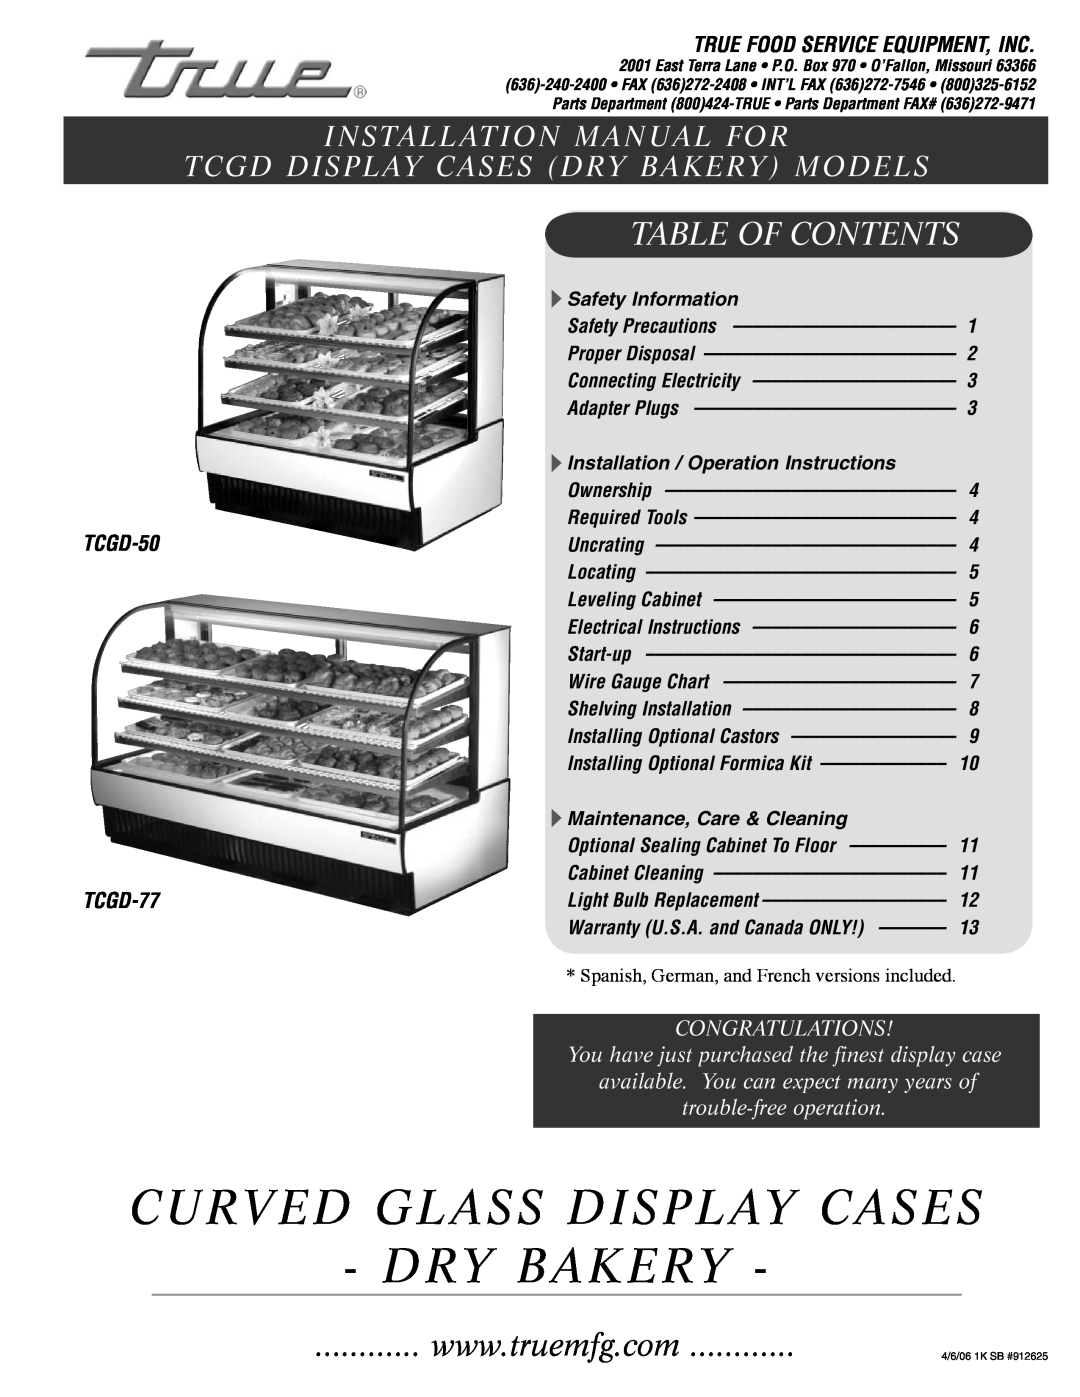 True Manufacturing Company installation manual TCGD-50 TCGD-77, Curved Glass Display Cases Dry Bakery, Congratulations 